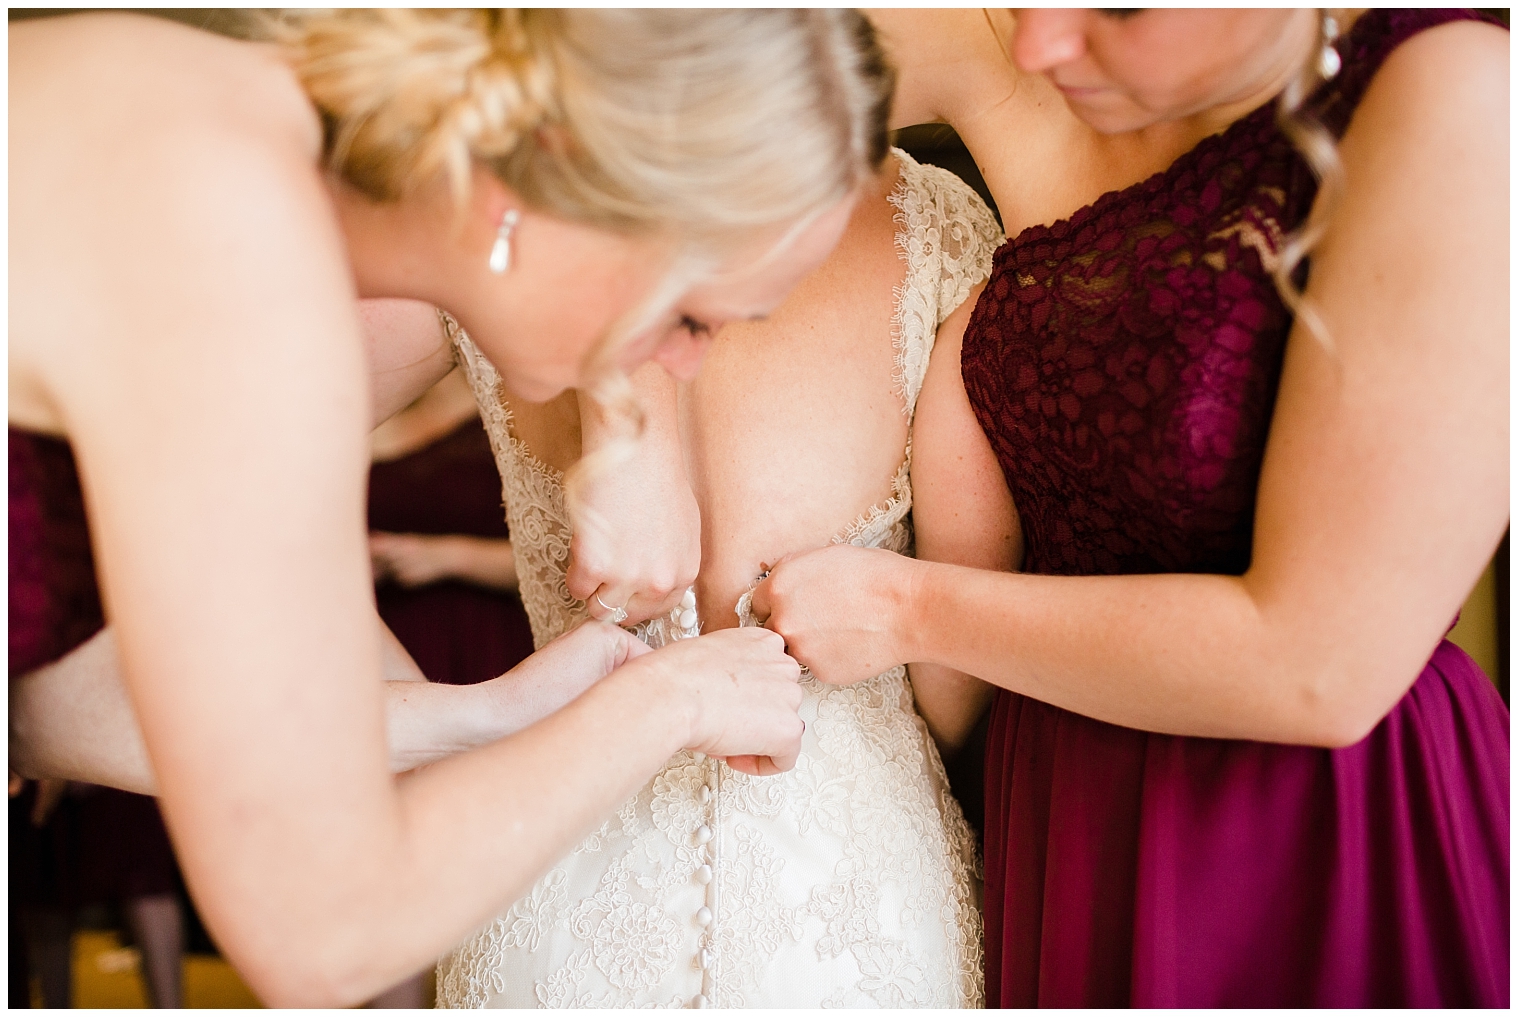 Bridesmaids help the bride into her wedding dress on her Copper Mountain wedding day.